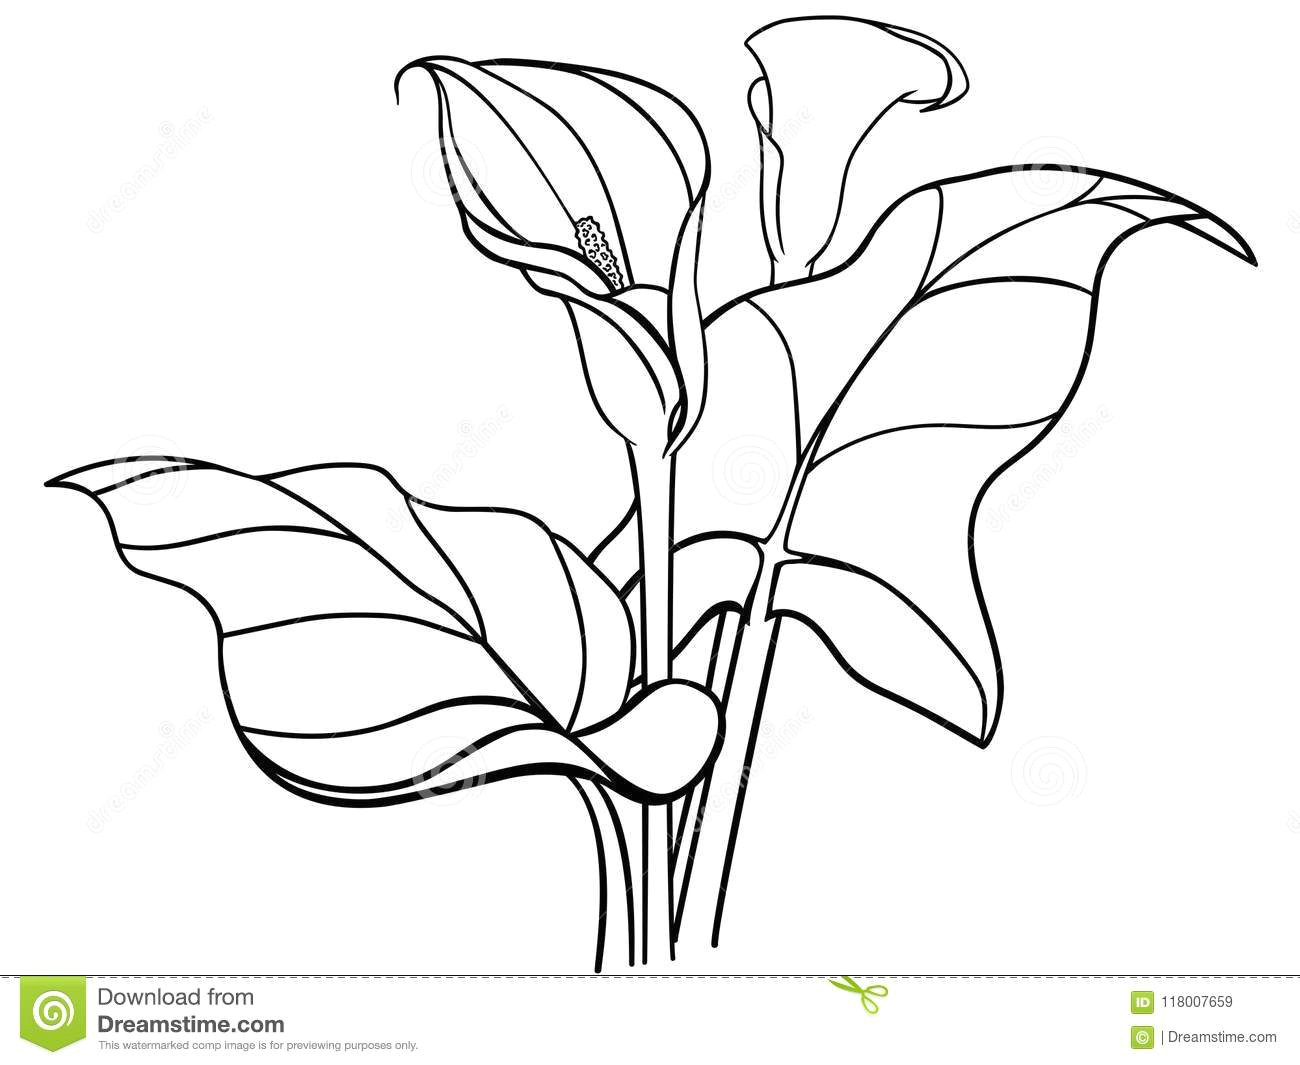 Drawing Of Flowers with Leaves Callas Flowers with Leaves Bouquet White Callas Lilies Line